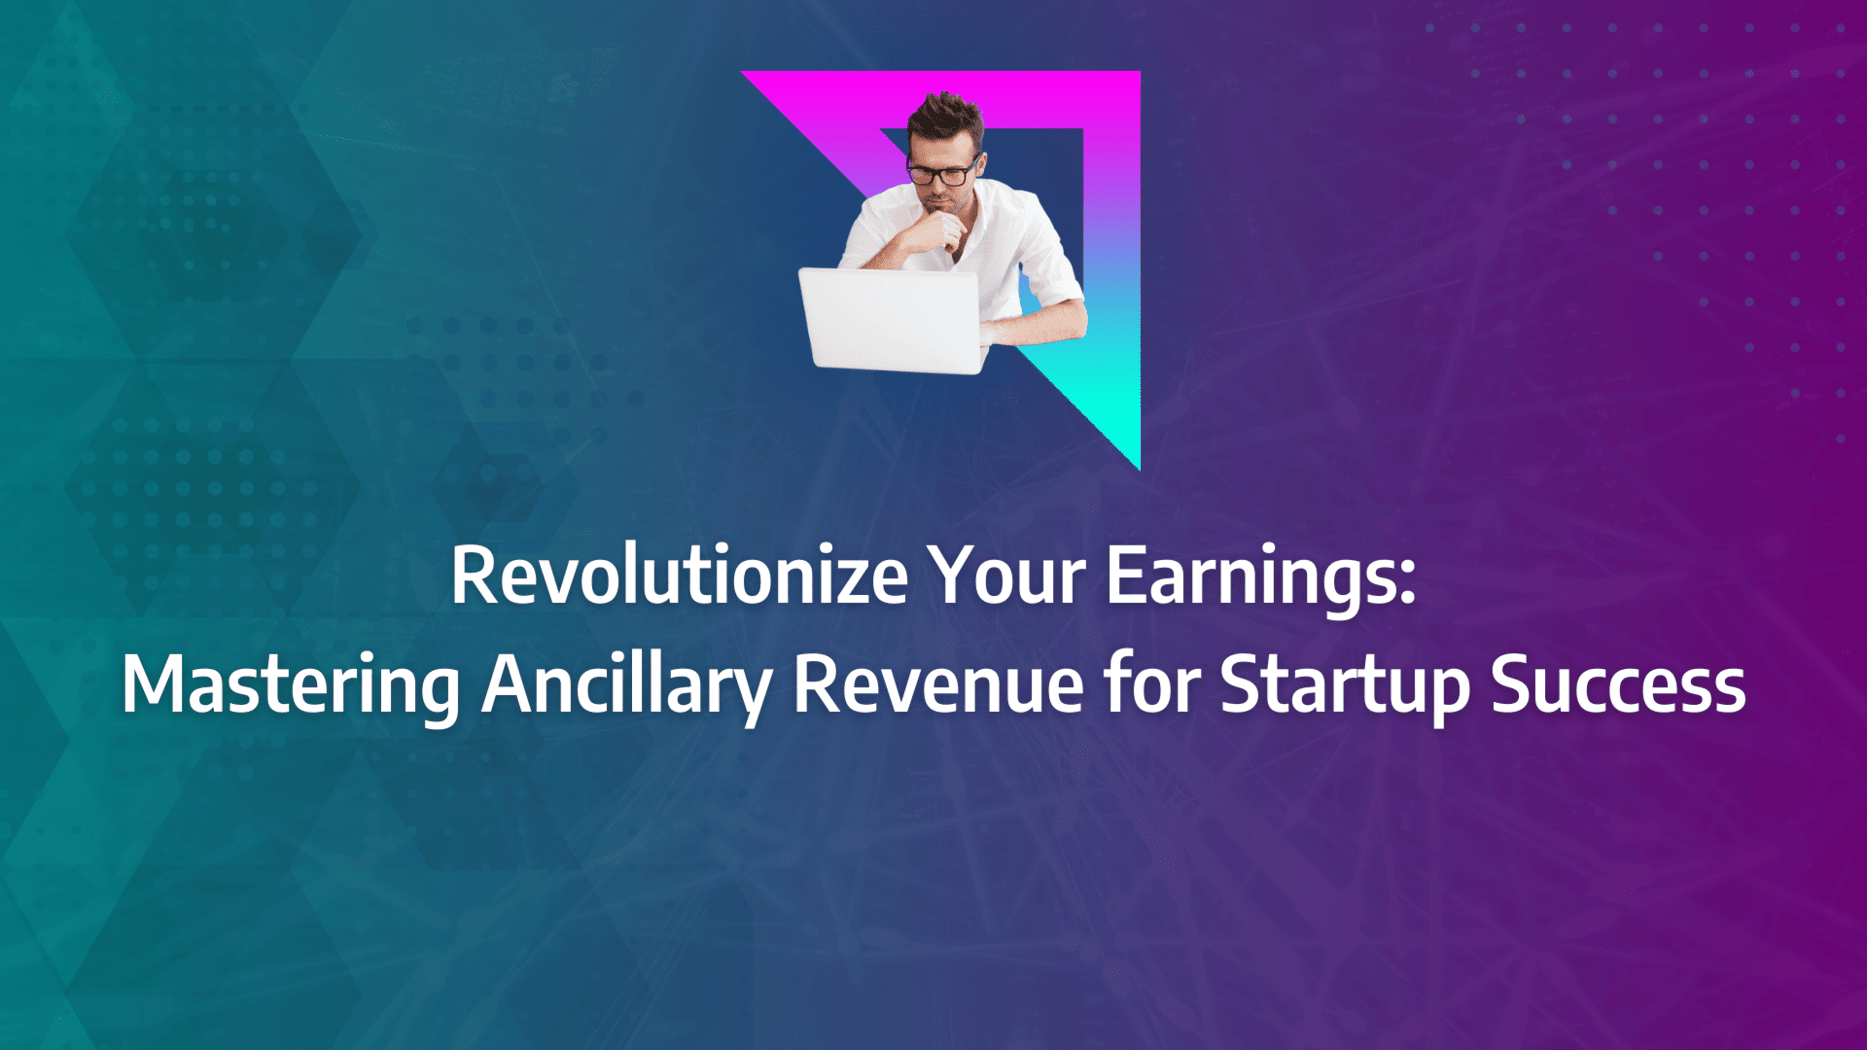 Ancillary revenue: Accelerating financial growth through diversified ancillary revenue streams, innovative revenue sources, strategic examples application, and startup-specific revenue channel development.: strategy framework diagram for ancillary revenue examples, ancillary revenue source, revenue stream, revenue streams for startups